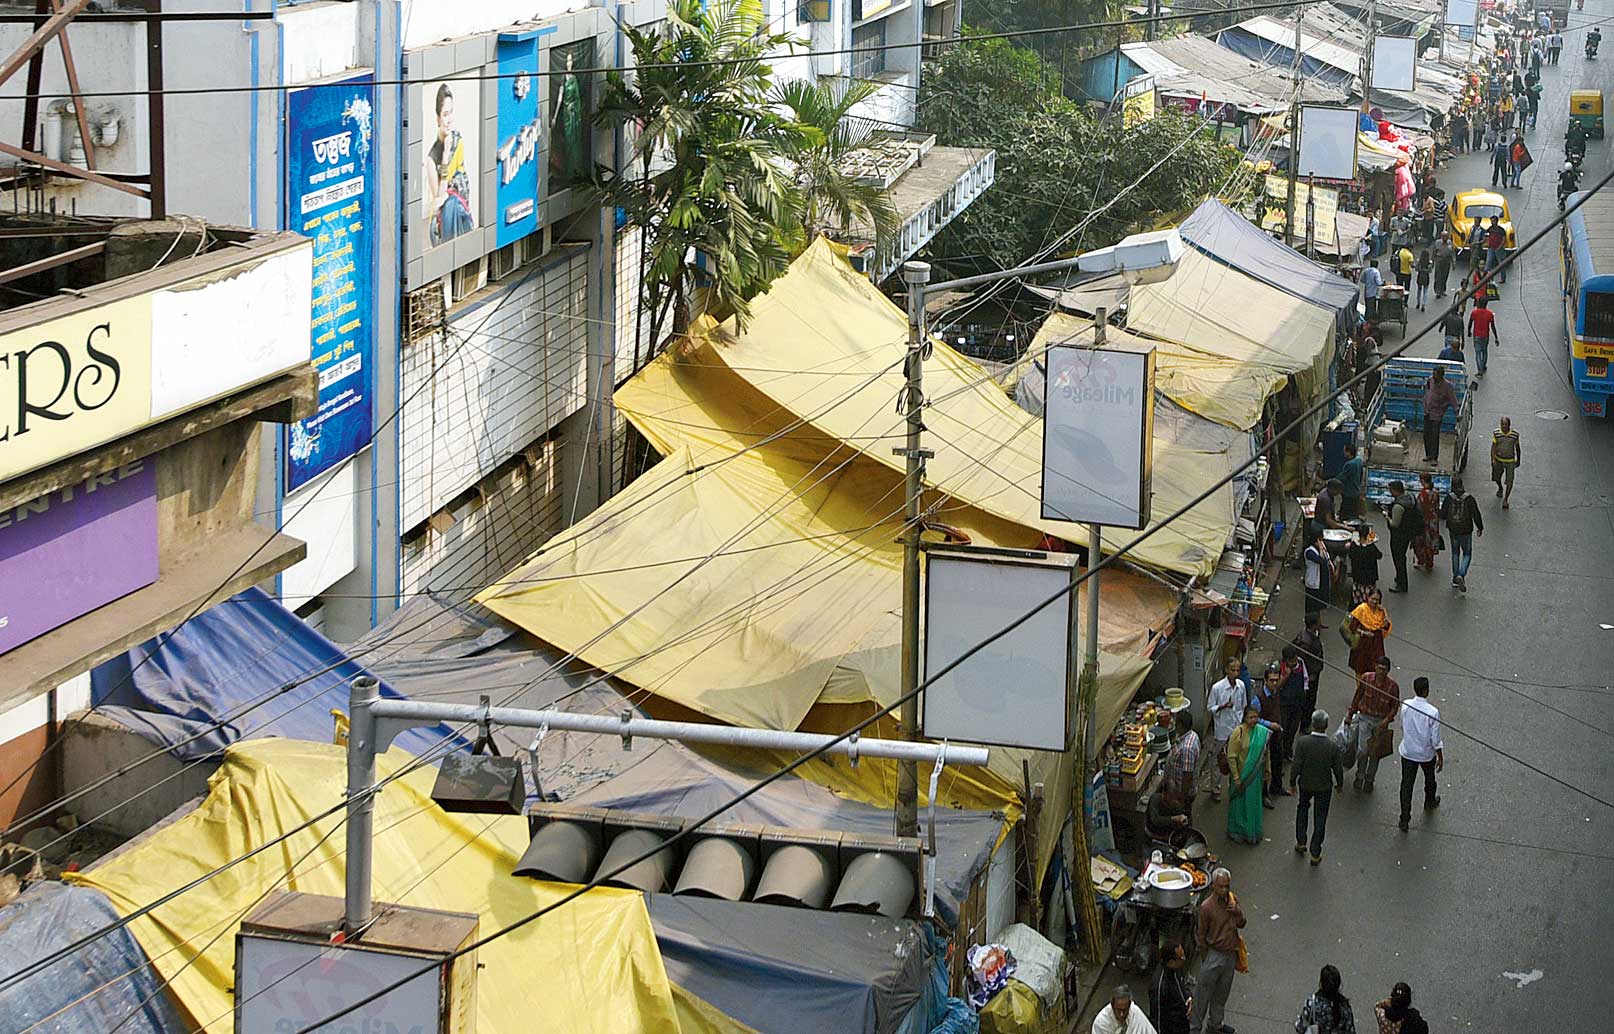 Tarpaulin and plastic sheets cover hawkers’ stalls on a Gariahat pavement. 

